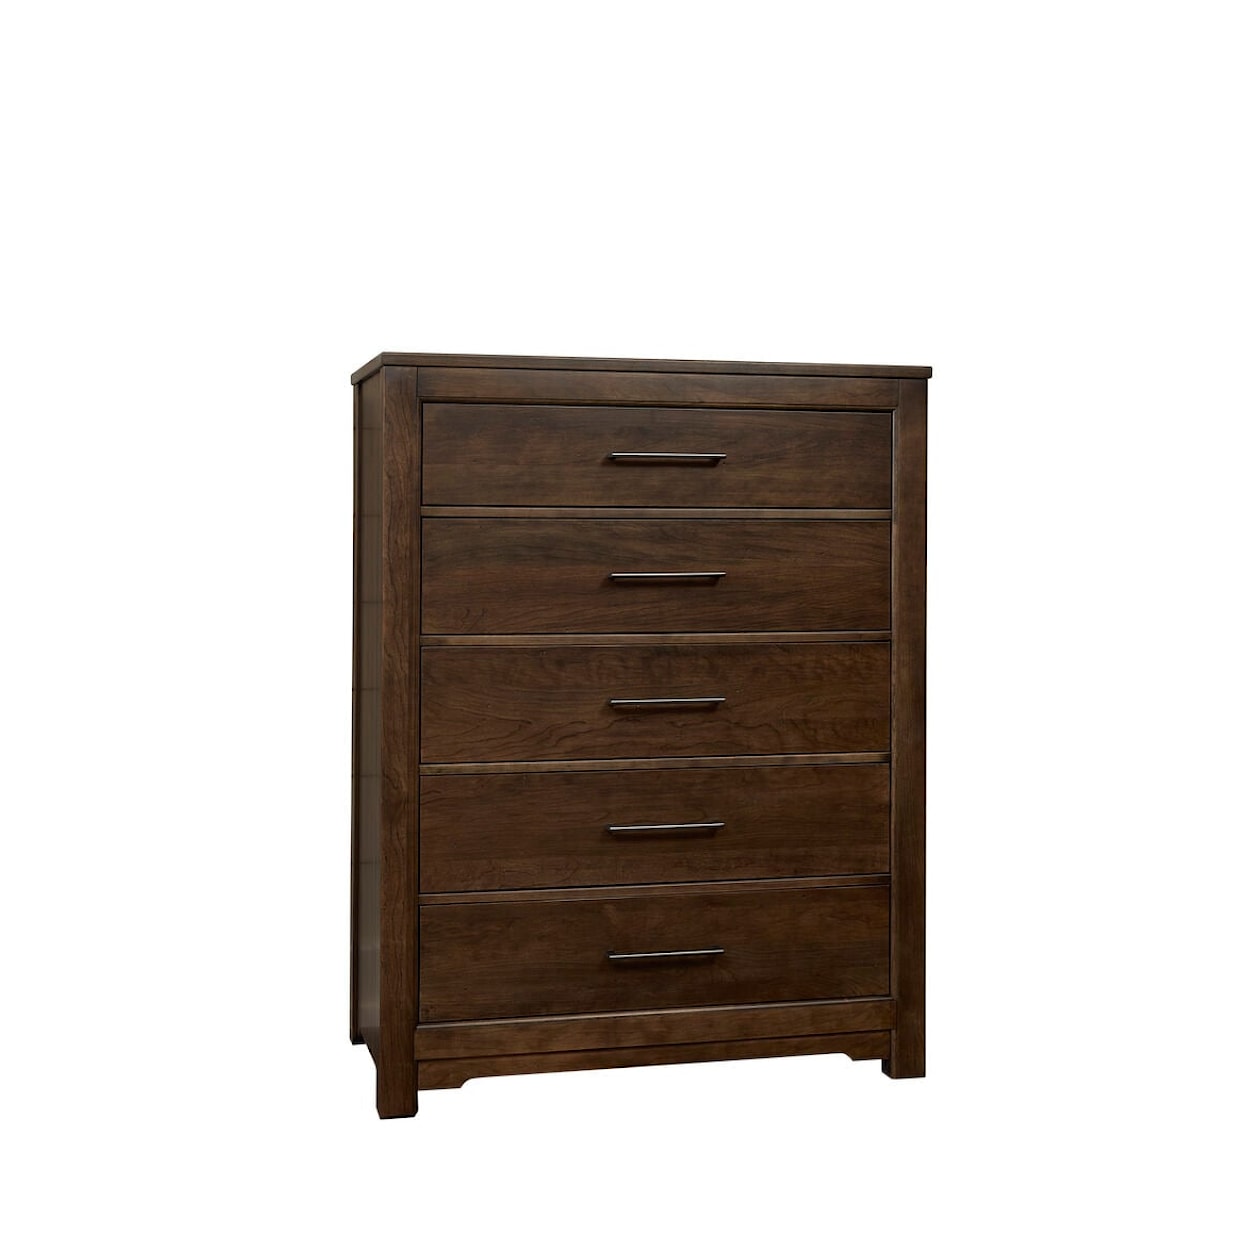 Virginia House Crafted Cherry - Dark Chest of Drawers